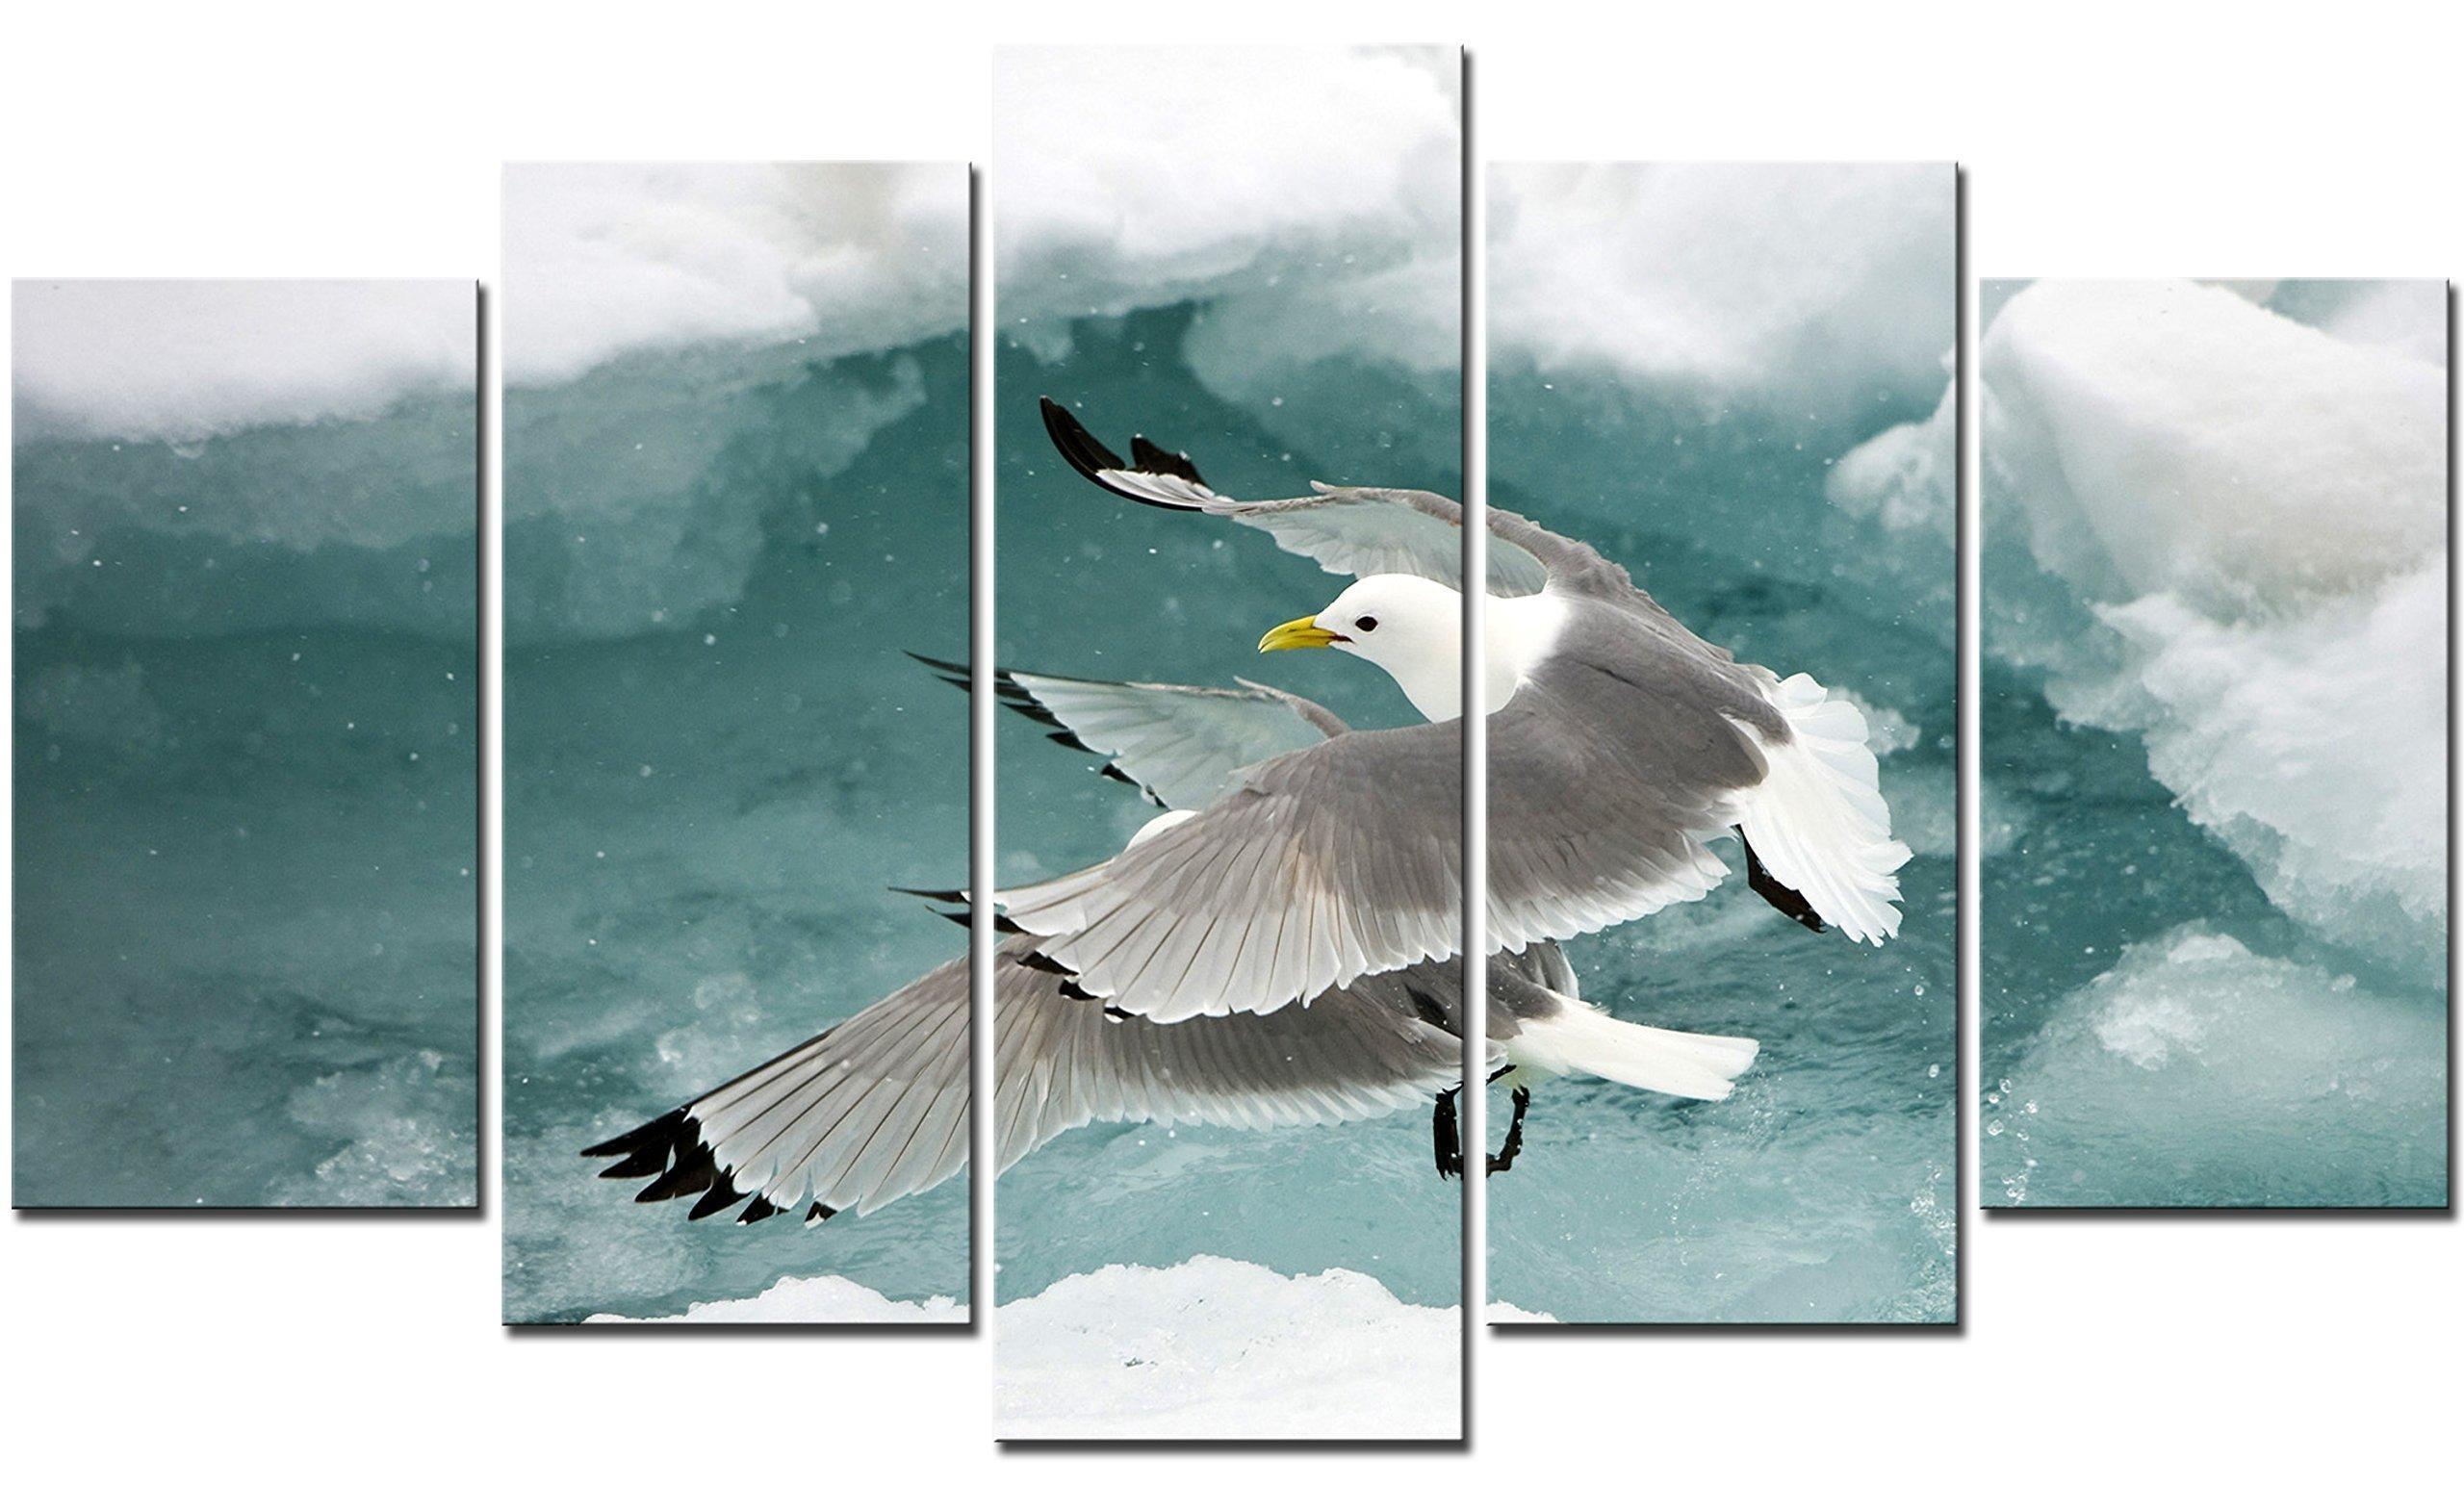 Natural art - Two Flying Seagull on The Sky Painting The Picture Print On Canvas Animal Pictures For Home Decor Gift piece Stretched By Wooden Frame Ready To Hang